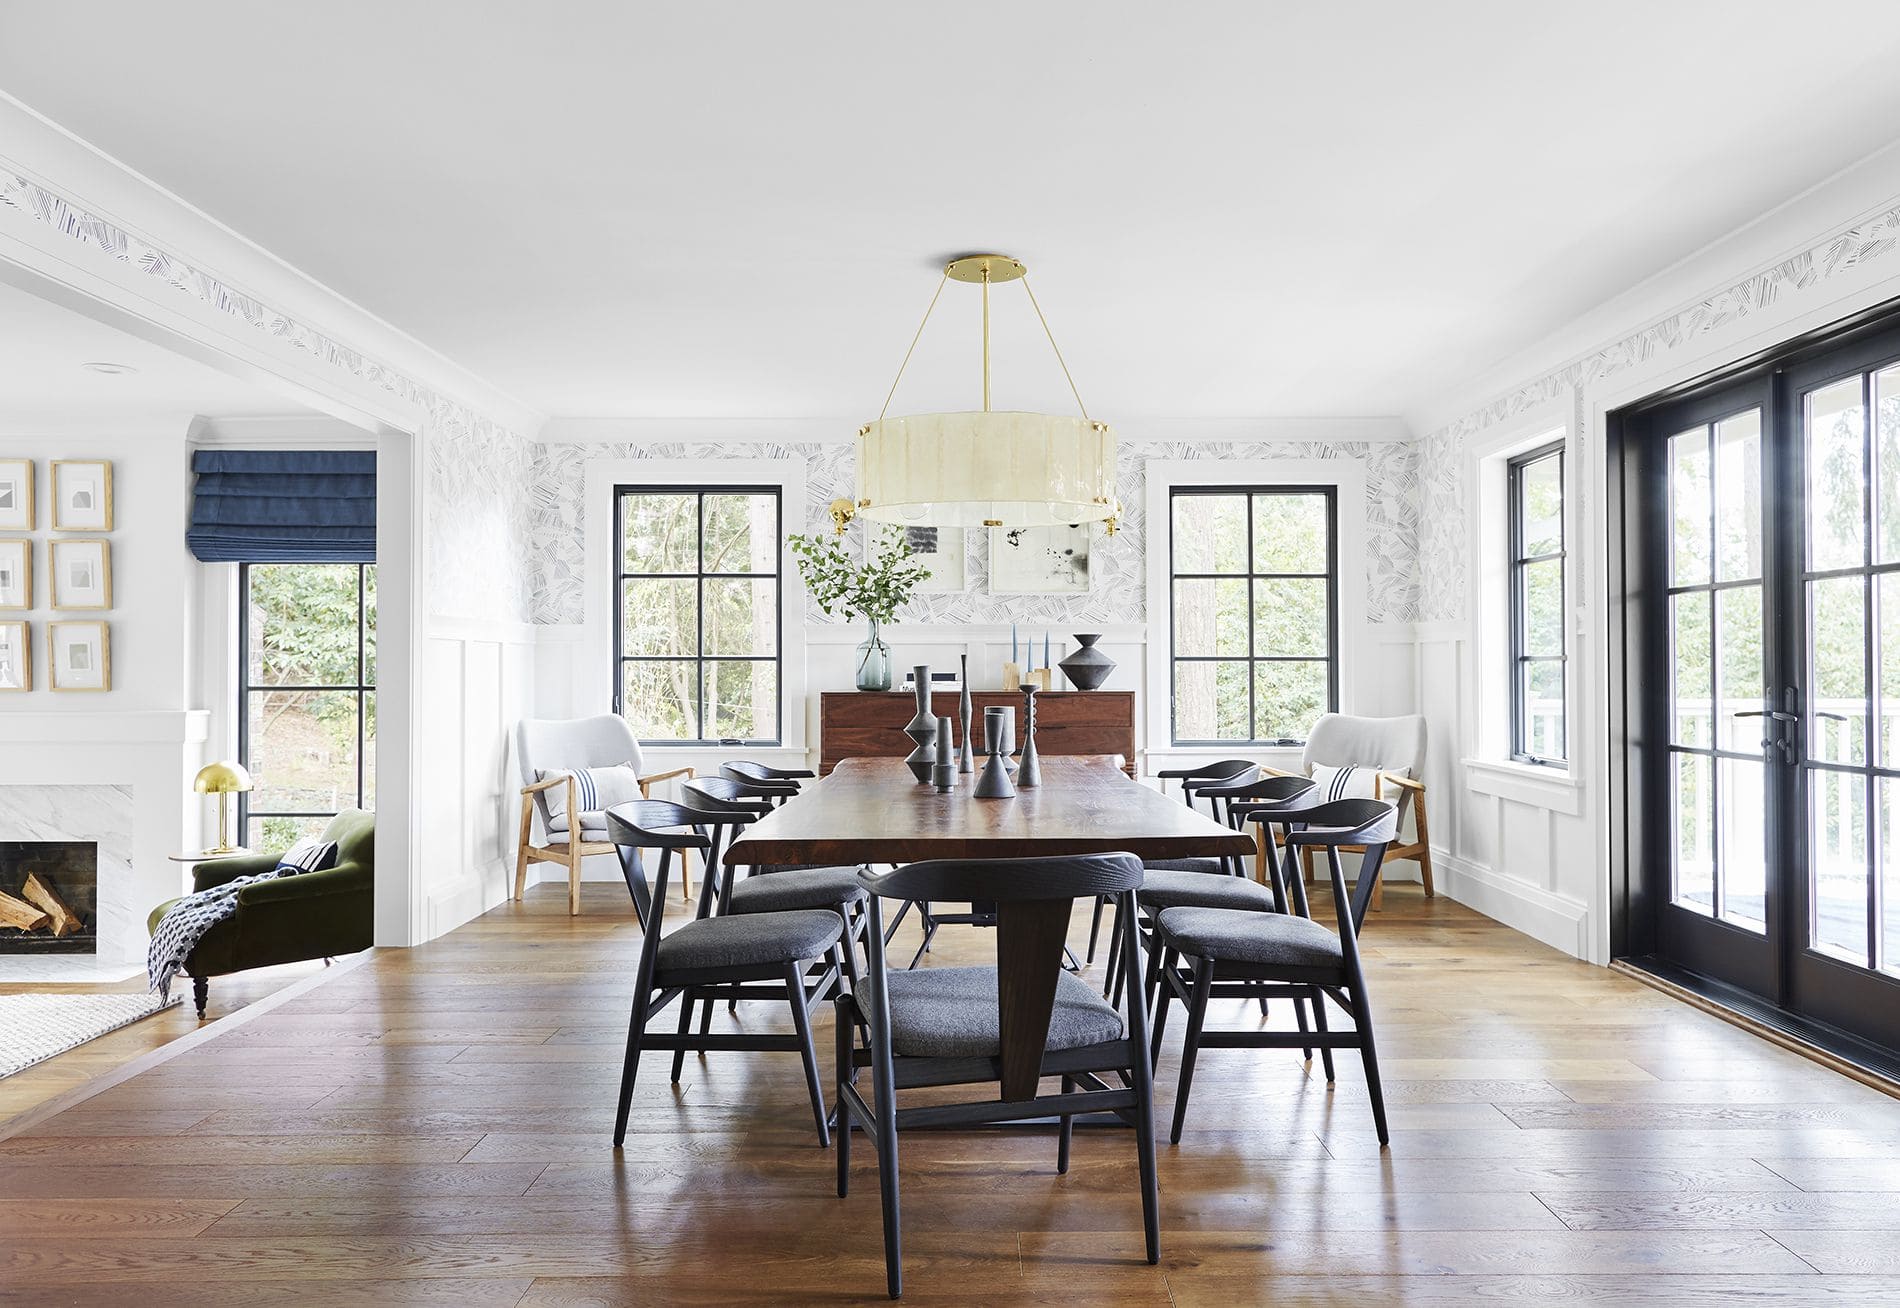 What Is In A Dining Room?